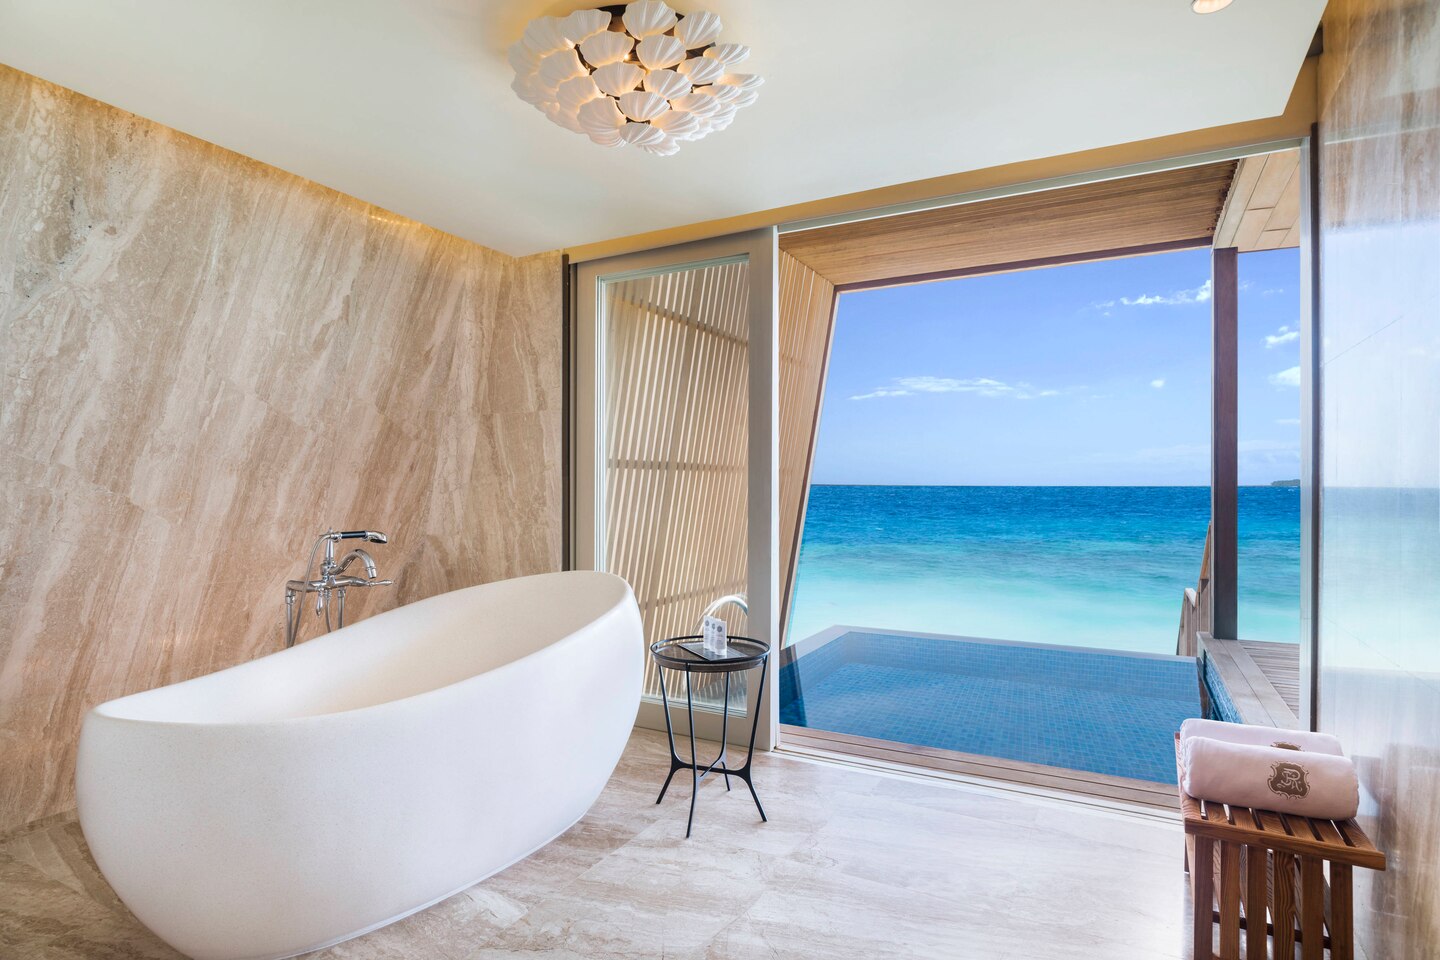 10 Design Ideas to Steal from Luxury Hotel Bathrooms